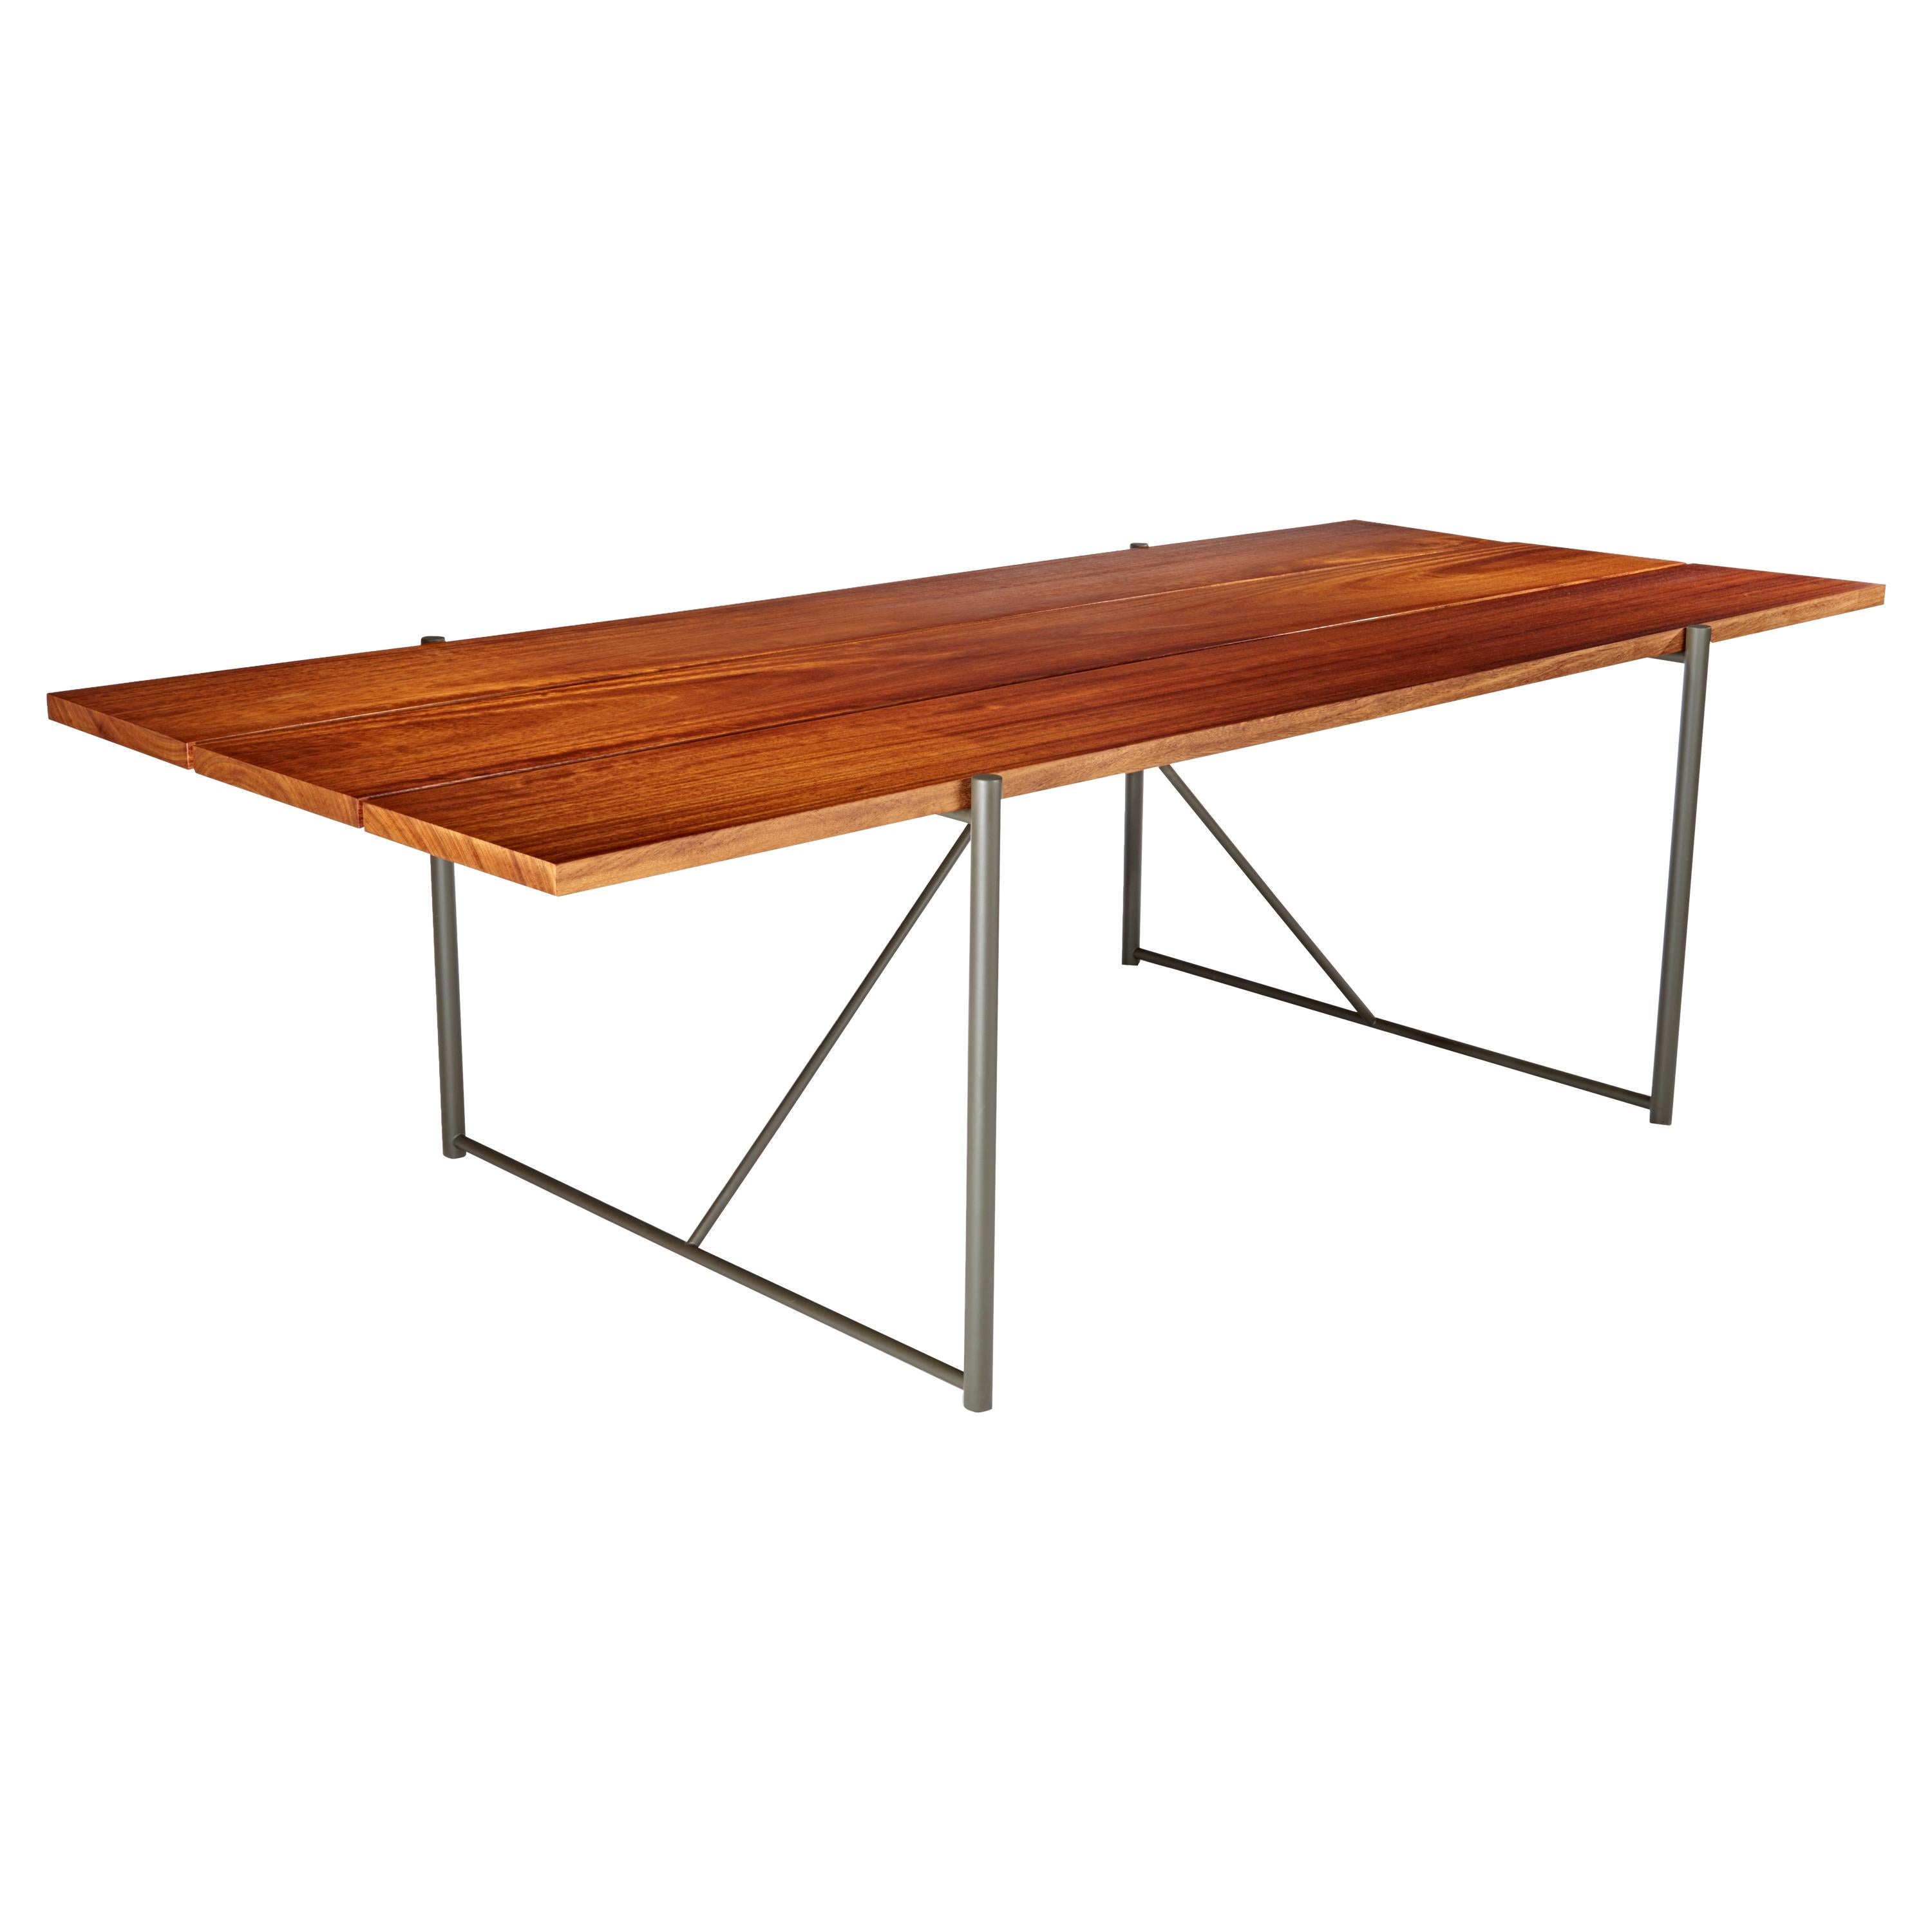 Plank Dining Table Stainless Steel Base Teak Wood Solid Plank Top